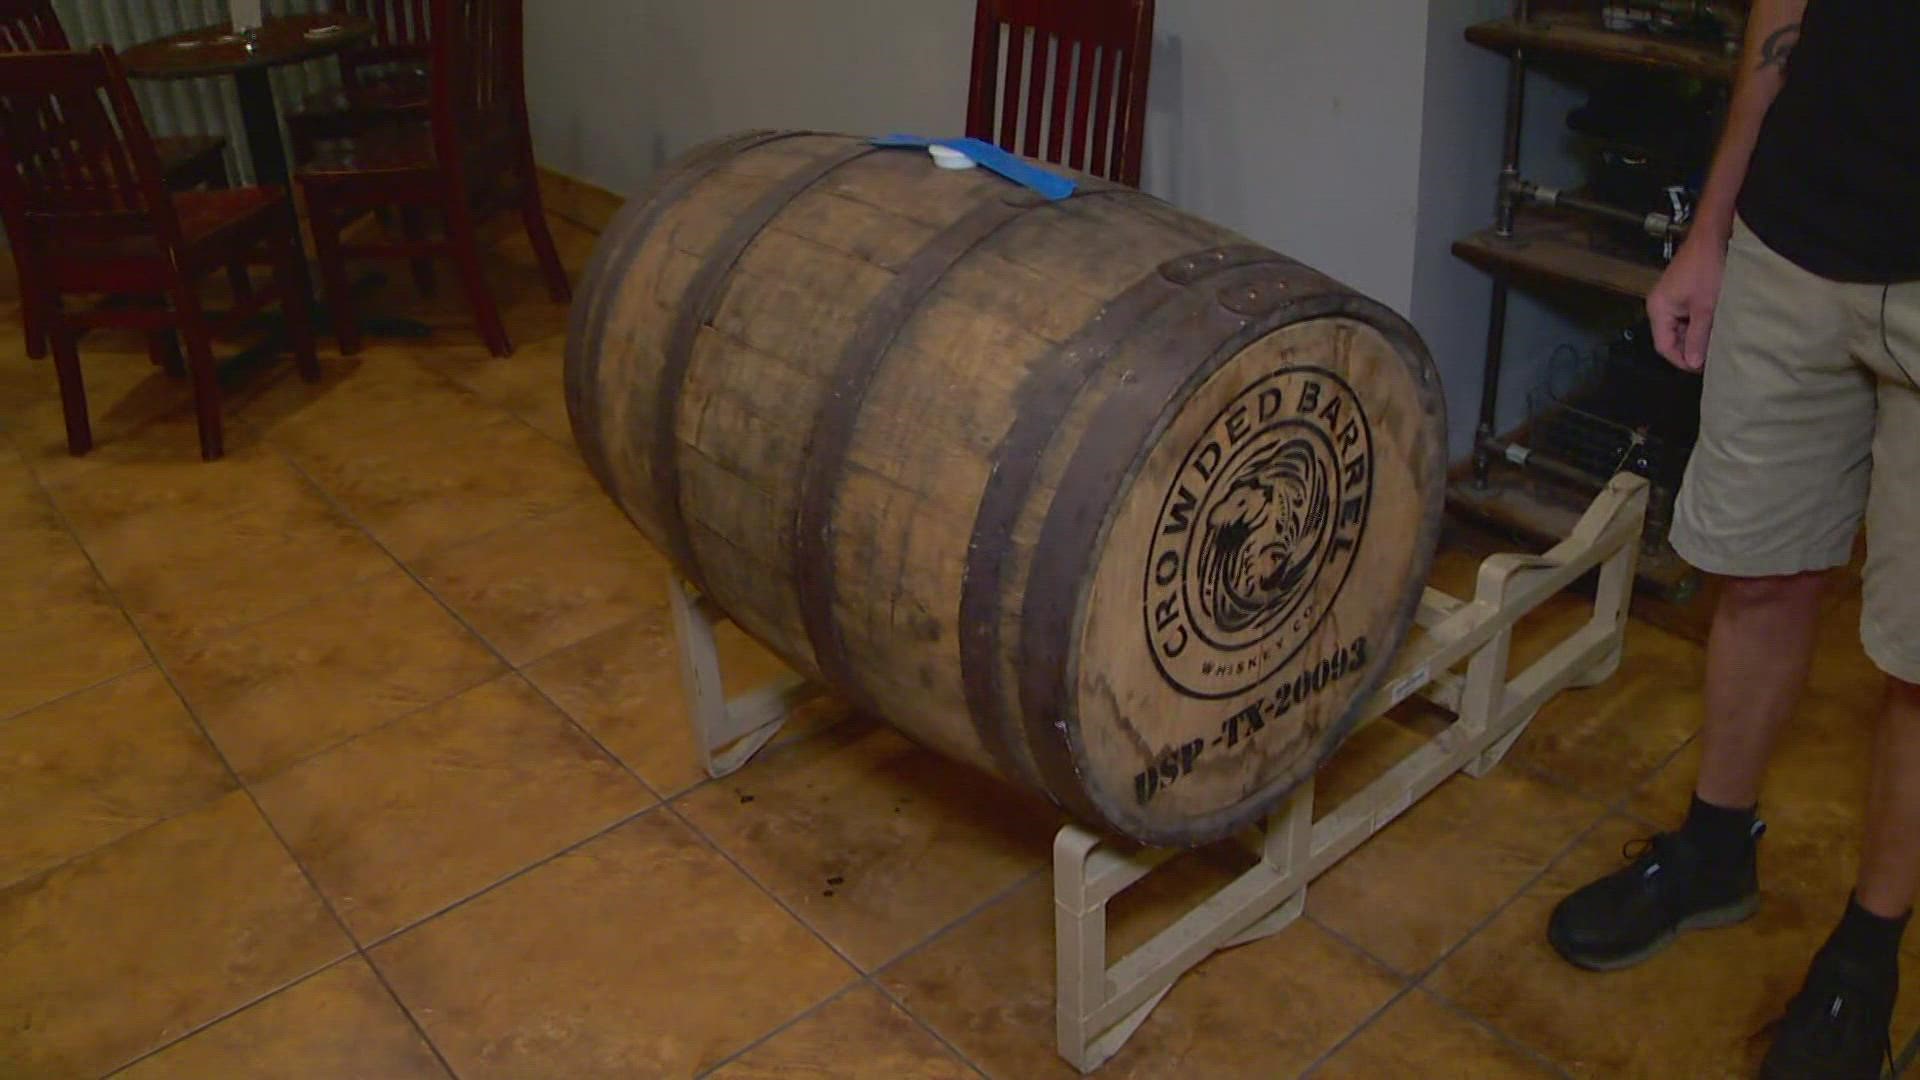 Dripping Springs is known for its breweries. KVUE Daybreak's Hannah Rucker caught up with Josh McIntosh, owner of Acopon Brewing Co.